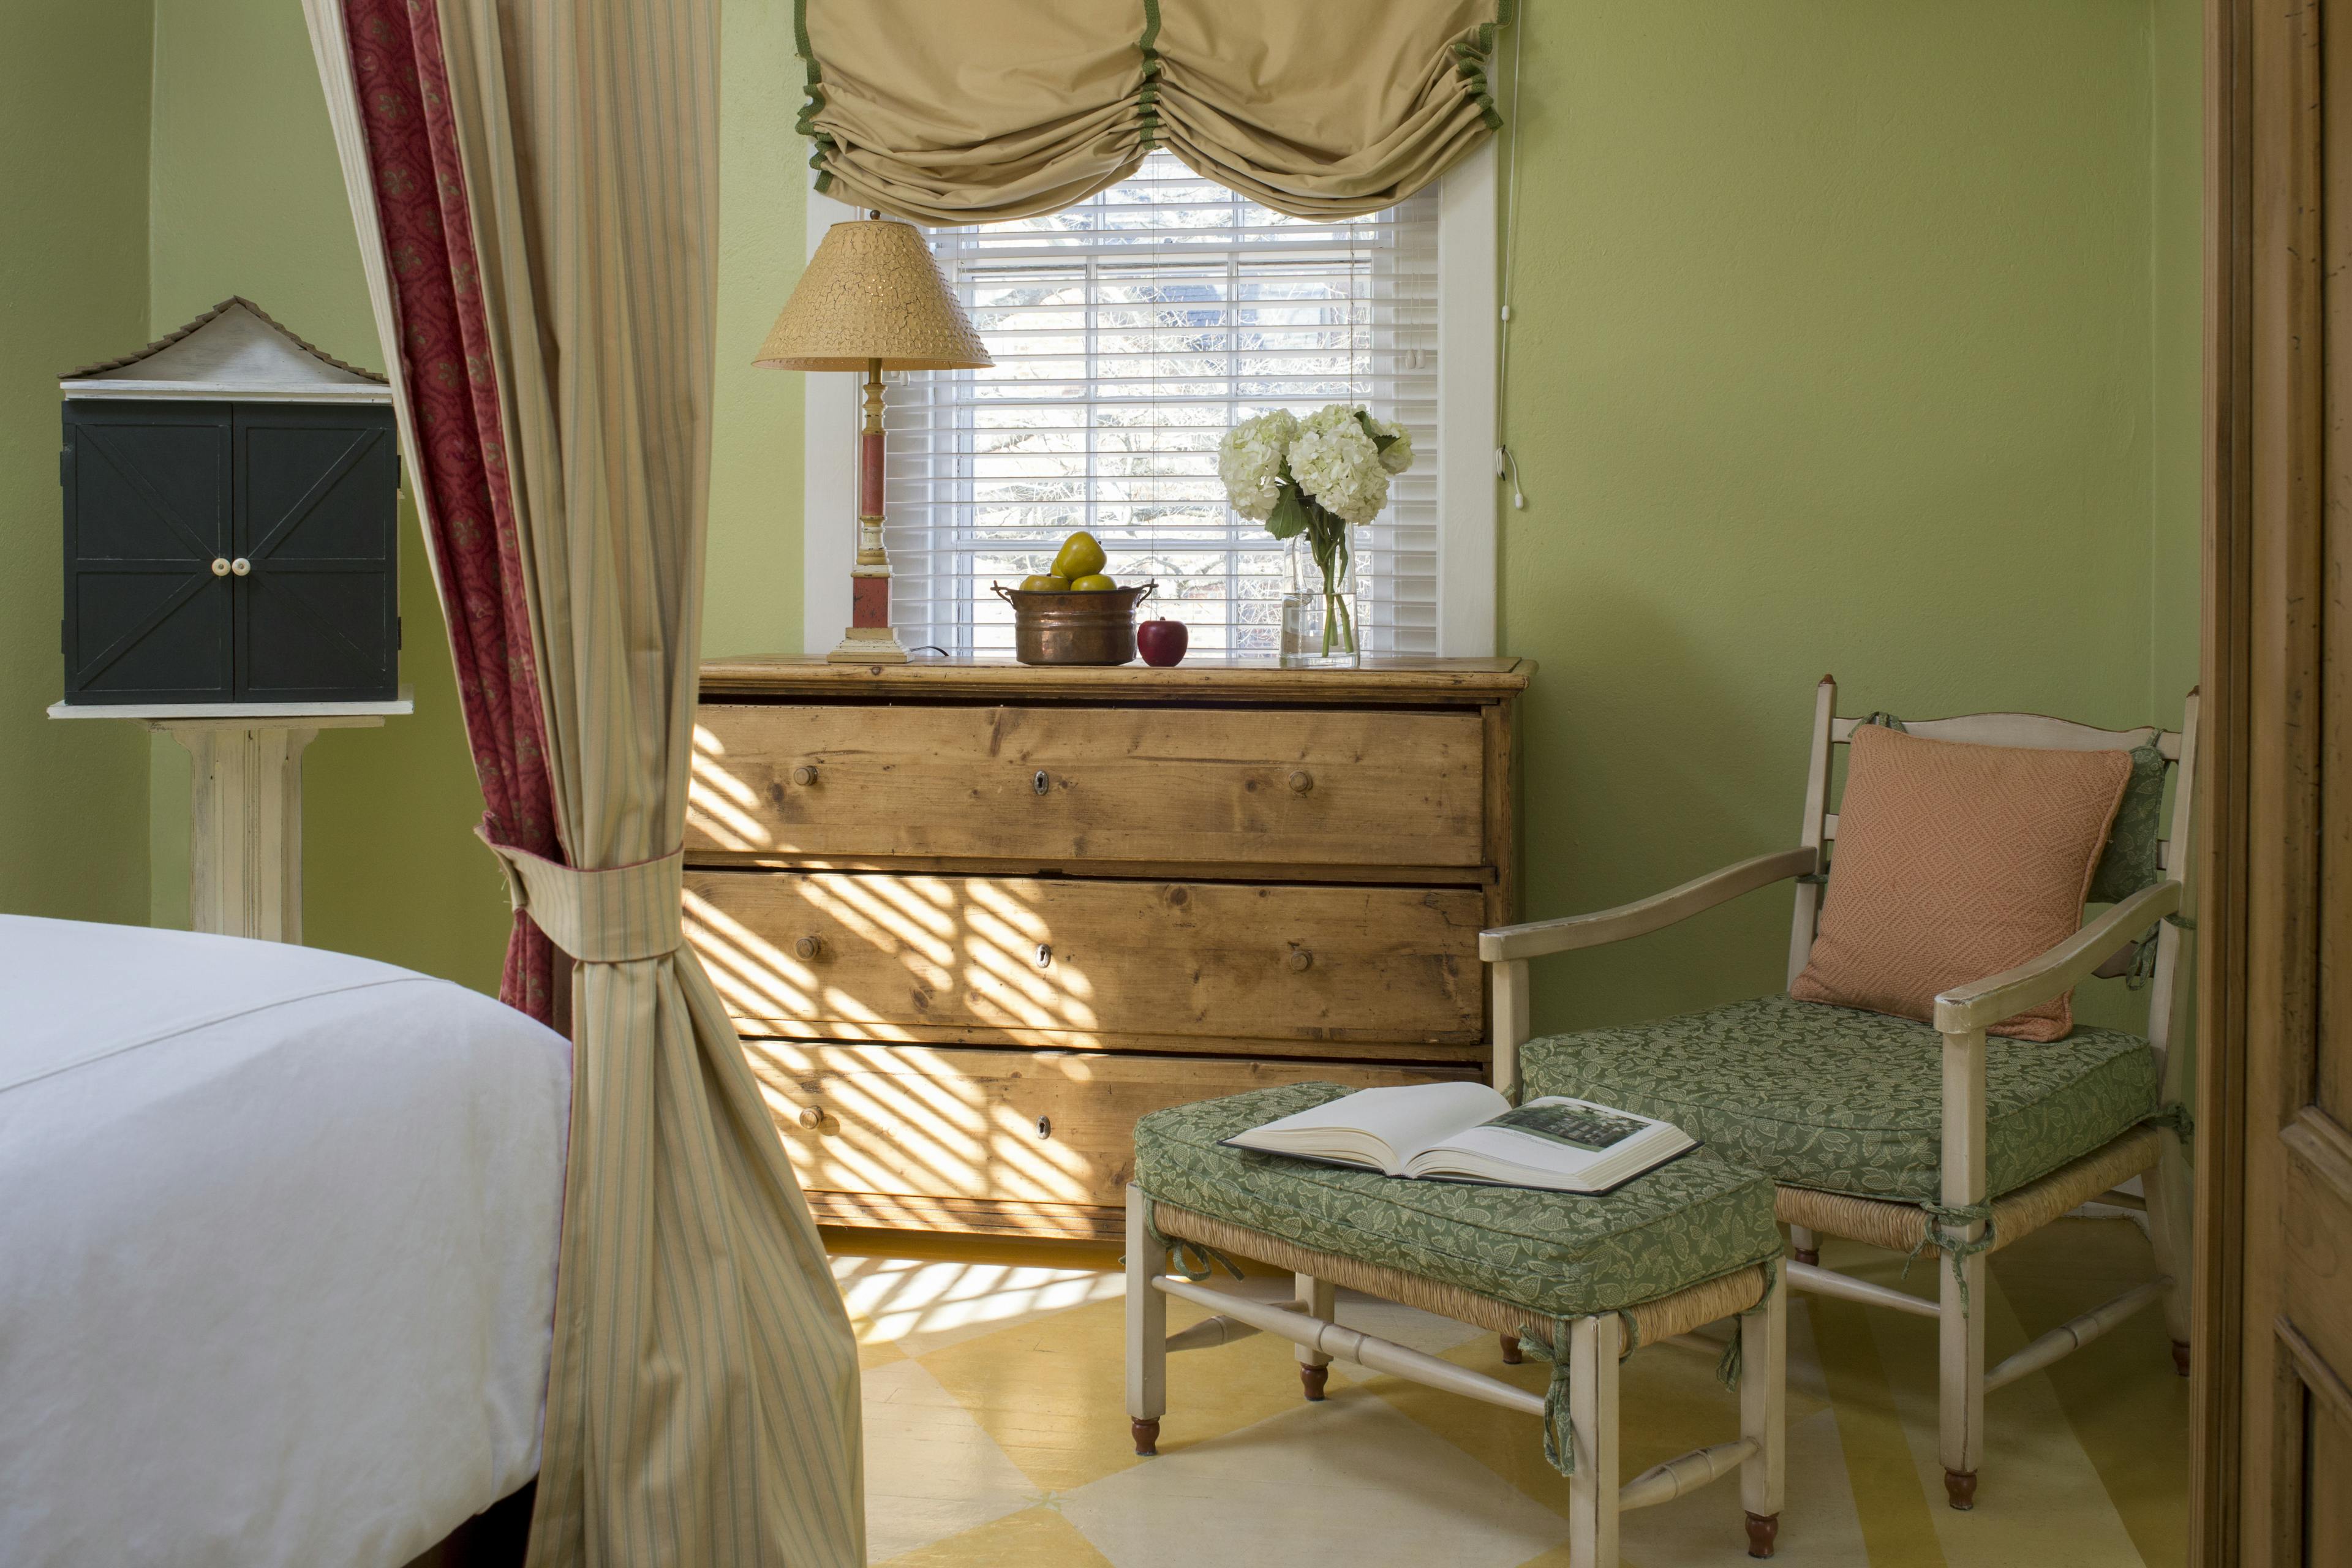 Wooden chair with cushions and matching footstool at foot of bed, wooden chest of drawers with lamp and vase of flowers